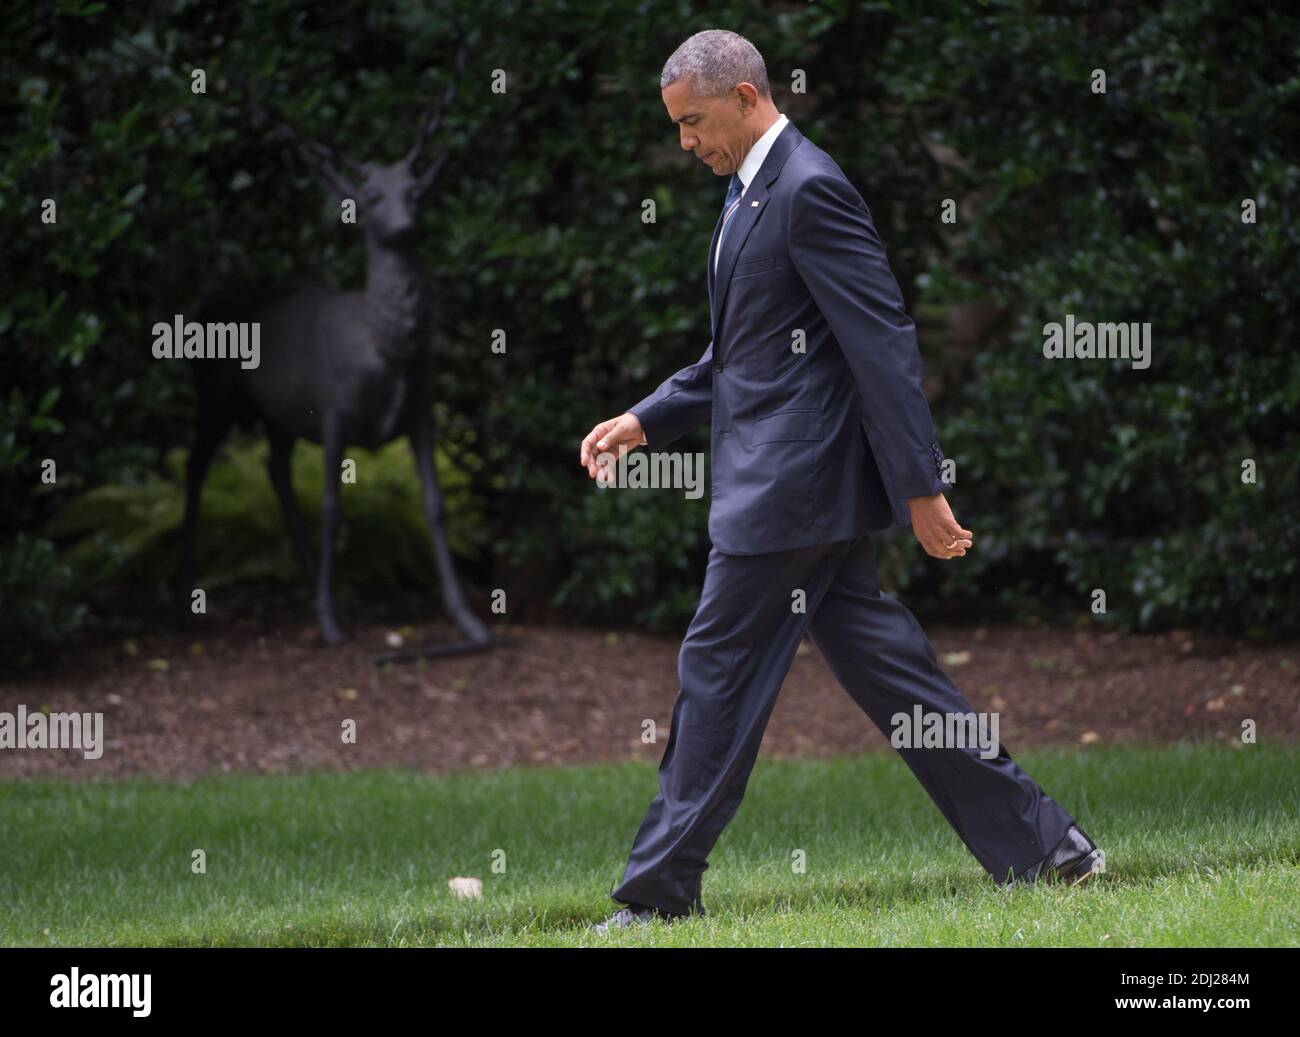 U.S. President Barack Obama walks across the South Lawn as he departs the White House for San Jose, California in Washington, DC, USA, 23 June 2016. While in San Jose, Obama will attend the Global Entrepreneurship Summit with Facebook co-founder and CEO Mark Zuckerberg. Photo by Molly Ryley/Pool/ABACAPRESS.COM Stock Photo